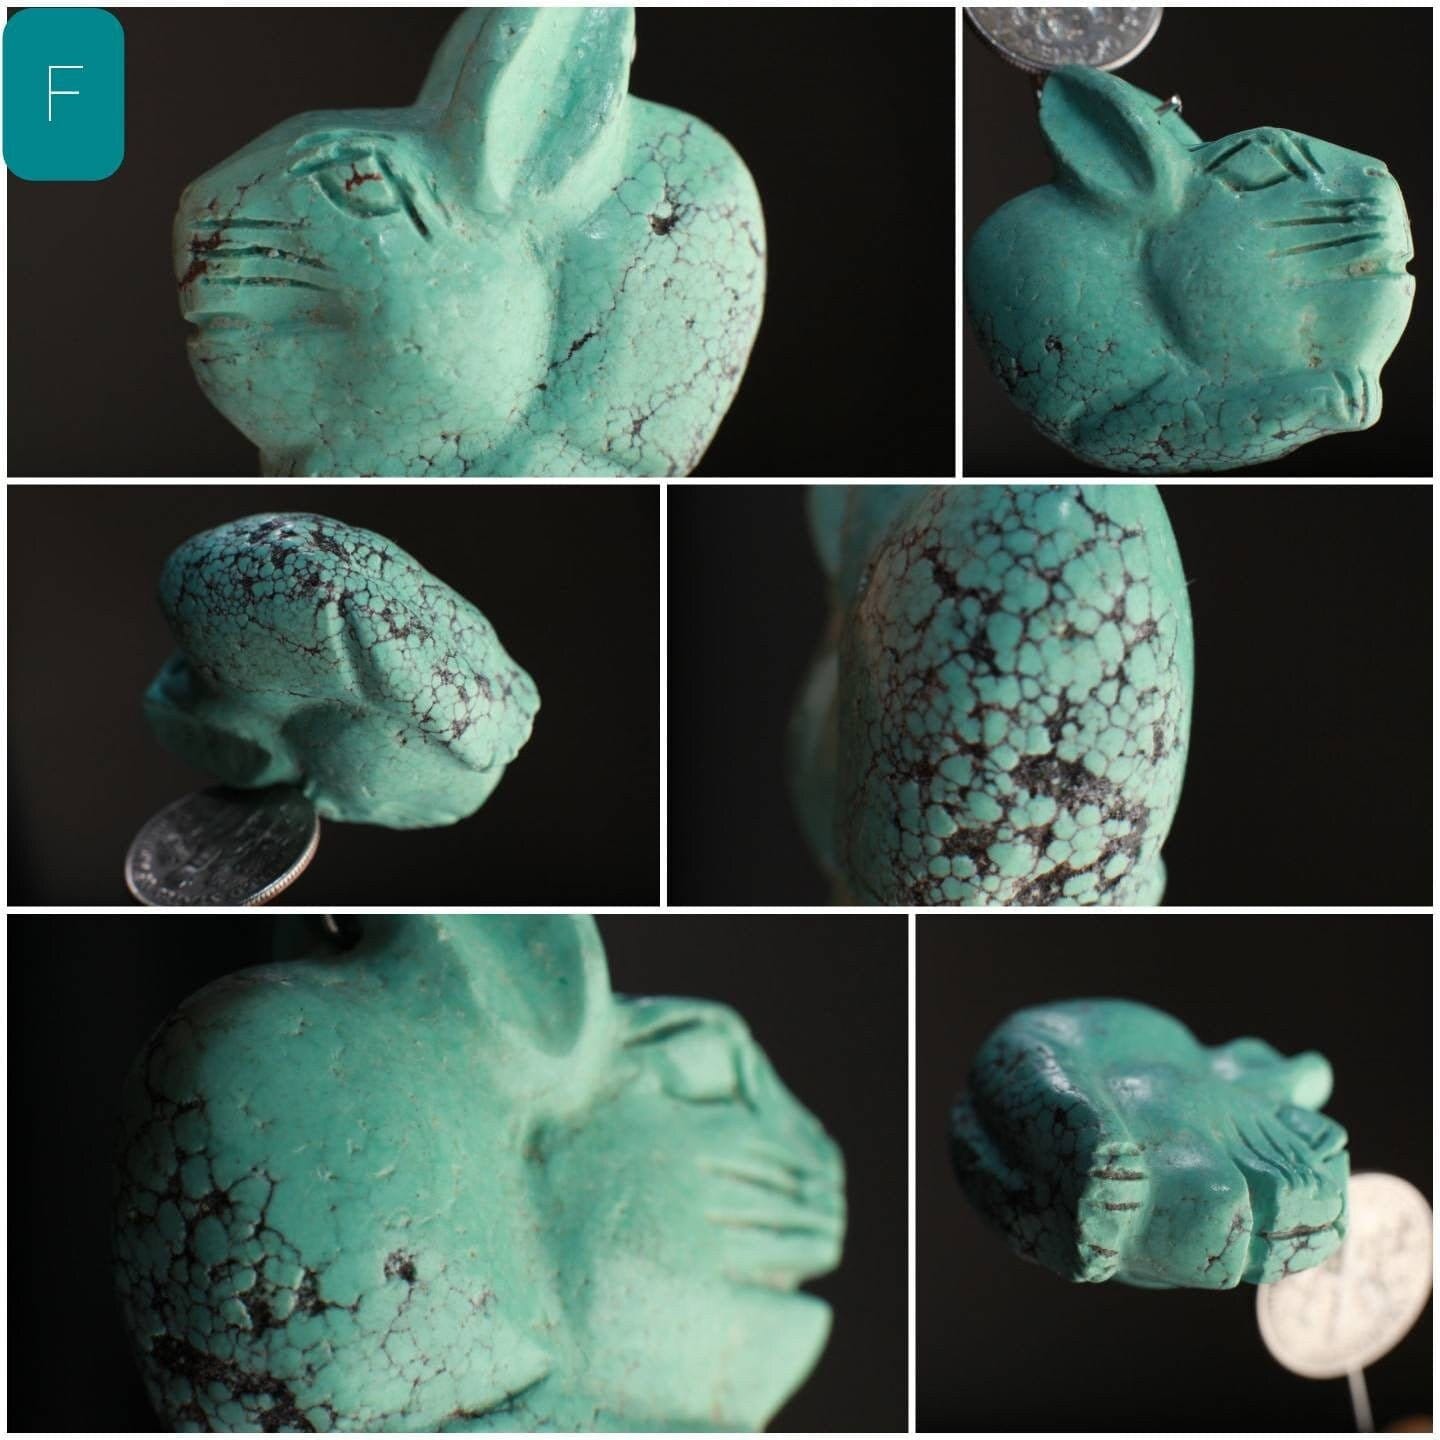 Natural Turquoise Hand Crafted Rabbit Pendant, Top Drilled Miniature Animals Collectible Figurines Vintage Sculpture, Old Stock